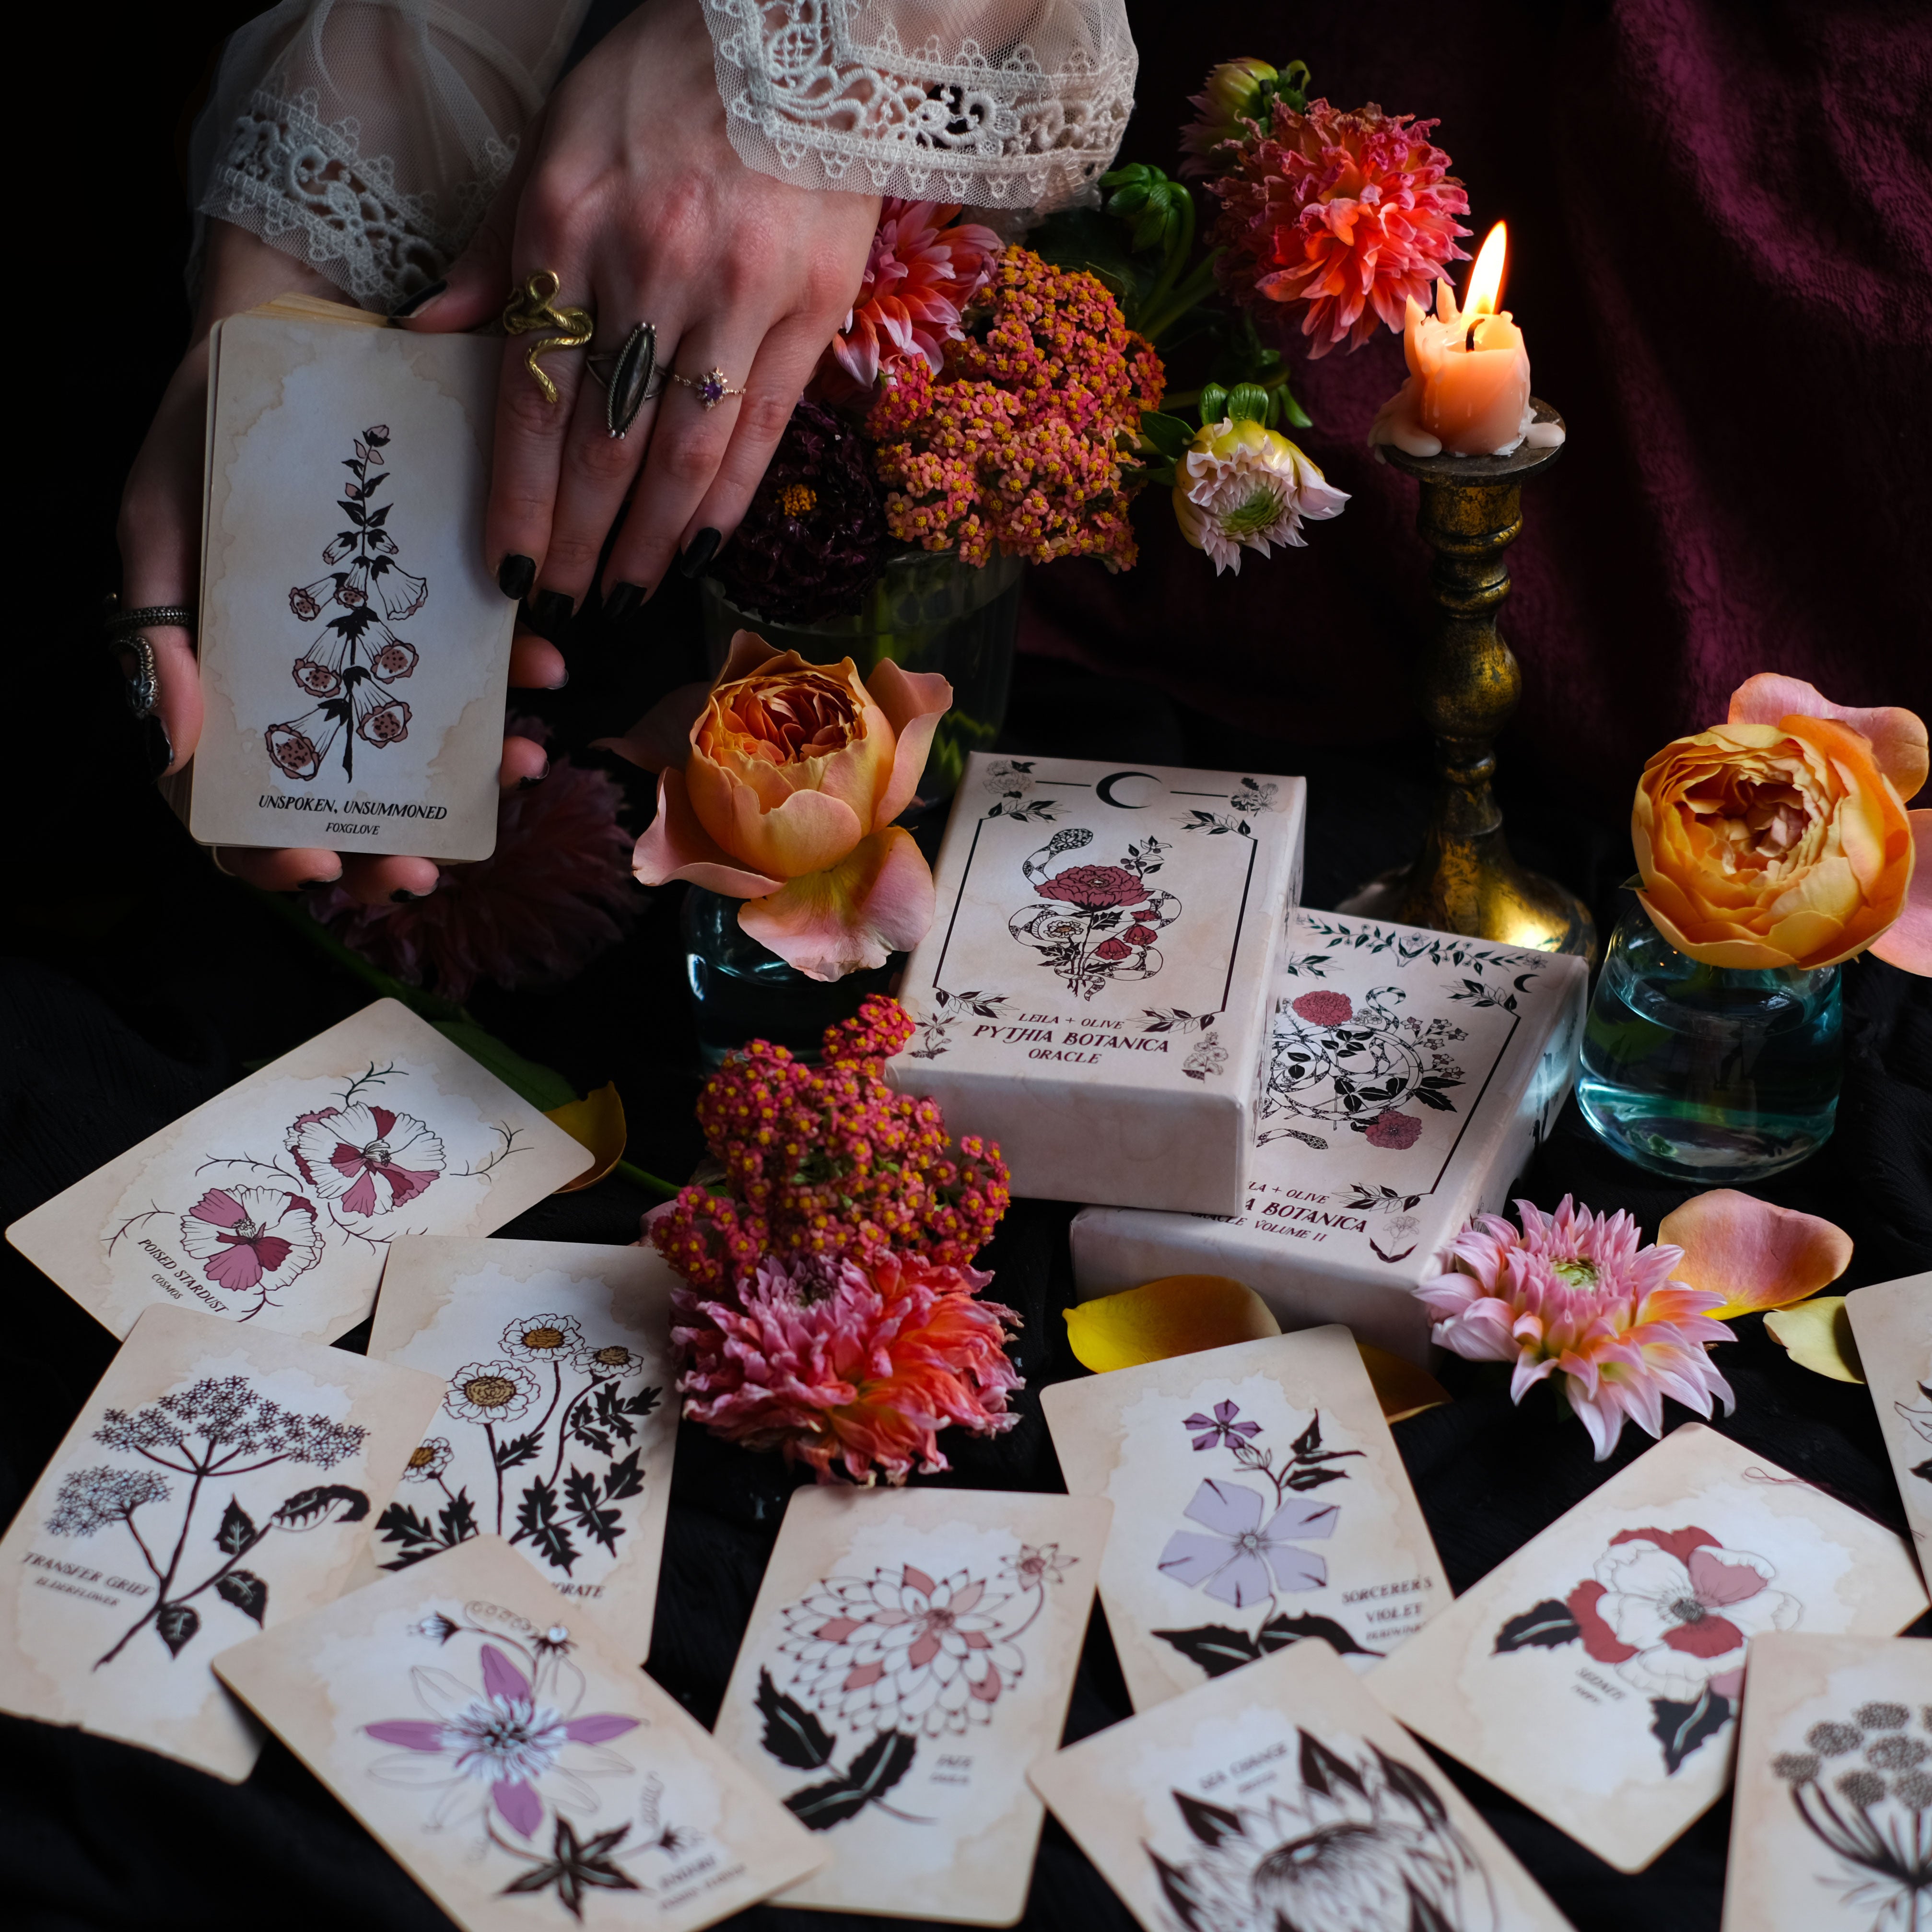 Botanical Tarot deck and Botanical Plant Oracle decks, illustrated by hand and rooted in plant magic. Each of these cards, from the Ophidia Rosa to Pythia Botanica, draw upon the garden journey, plant kingdom, ancient Tarot and poetry.